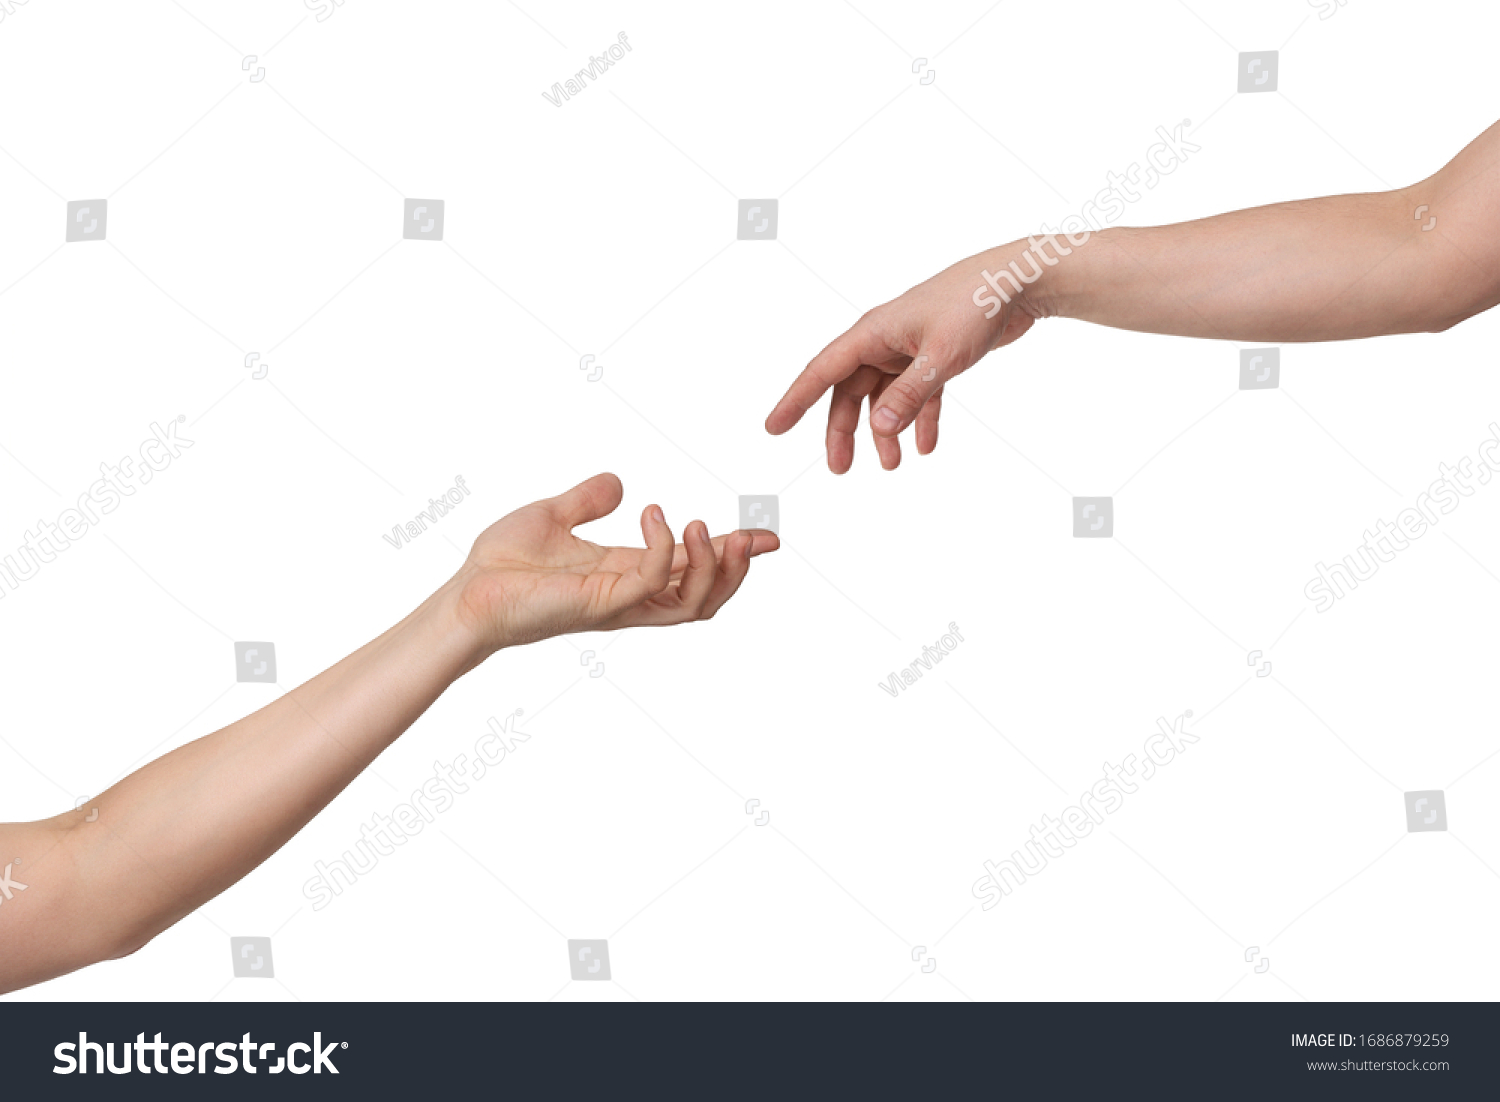 Hand extended from above demonstrates leniency to the other asking hand. Isolated on white background with copy space #1686879259